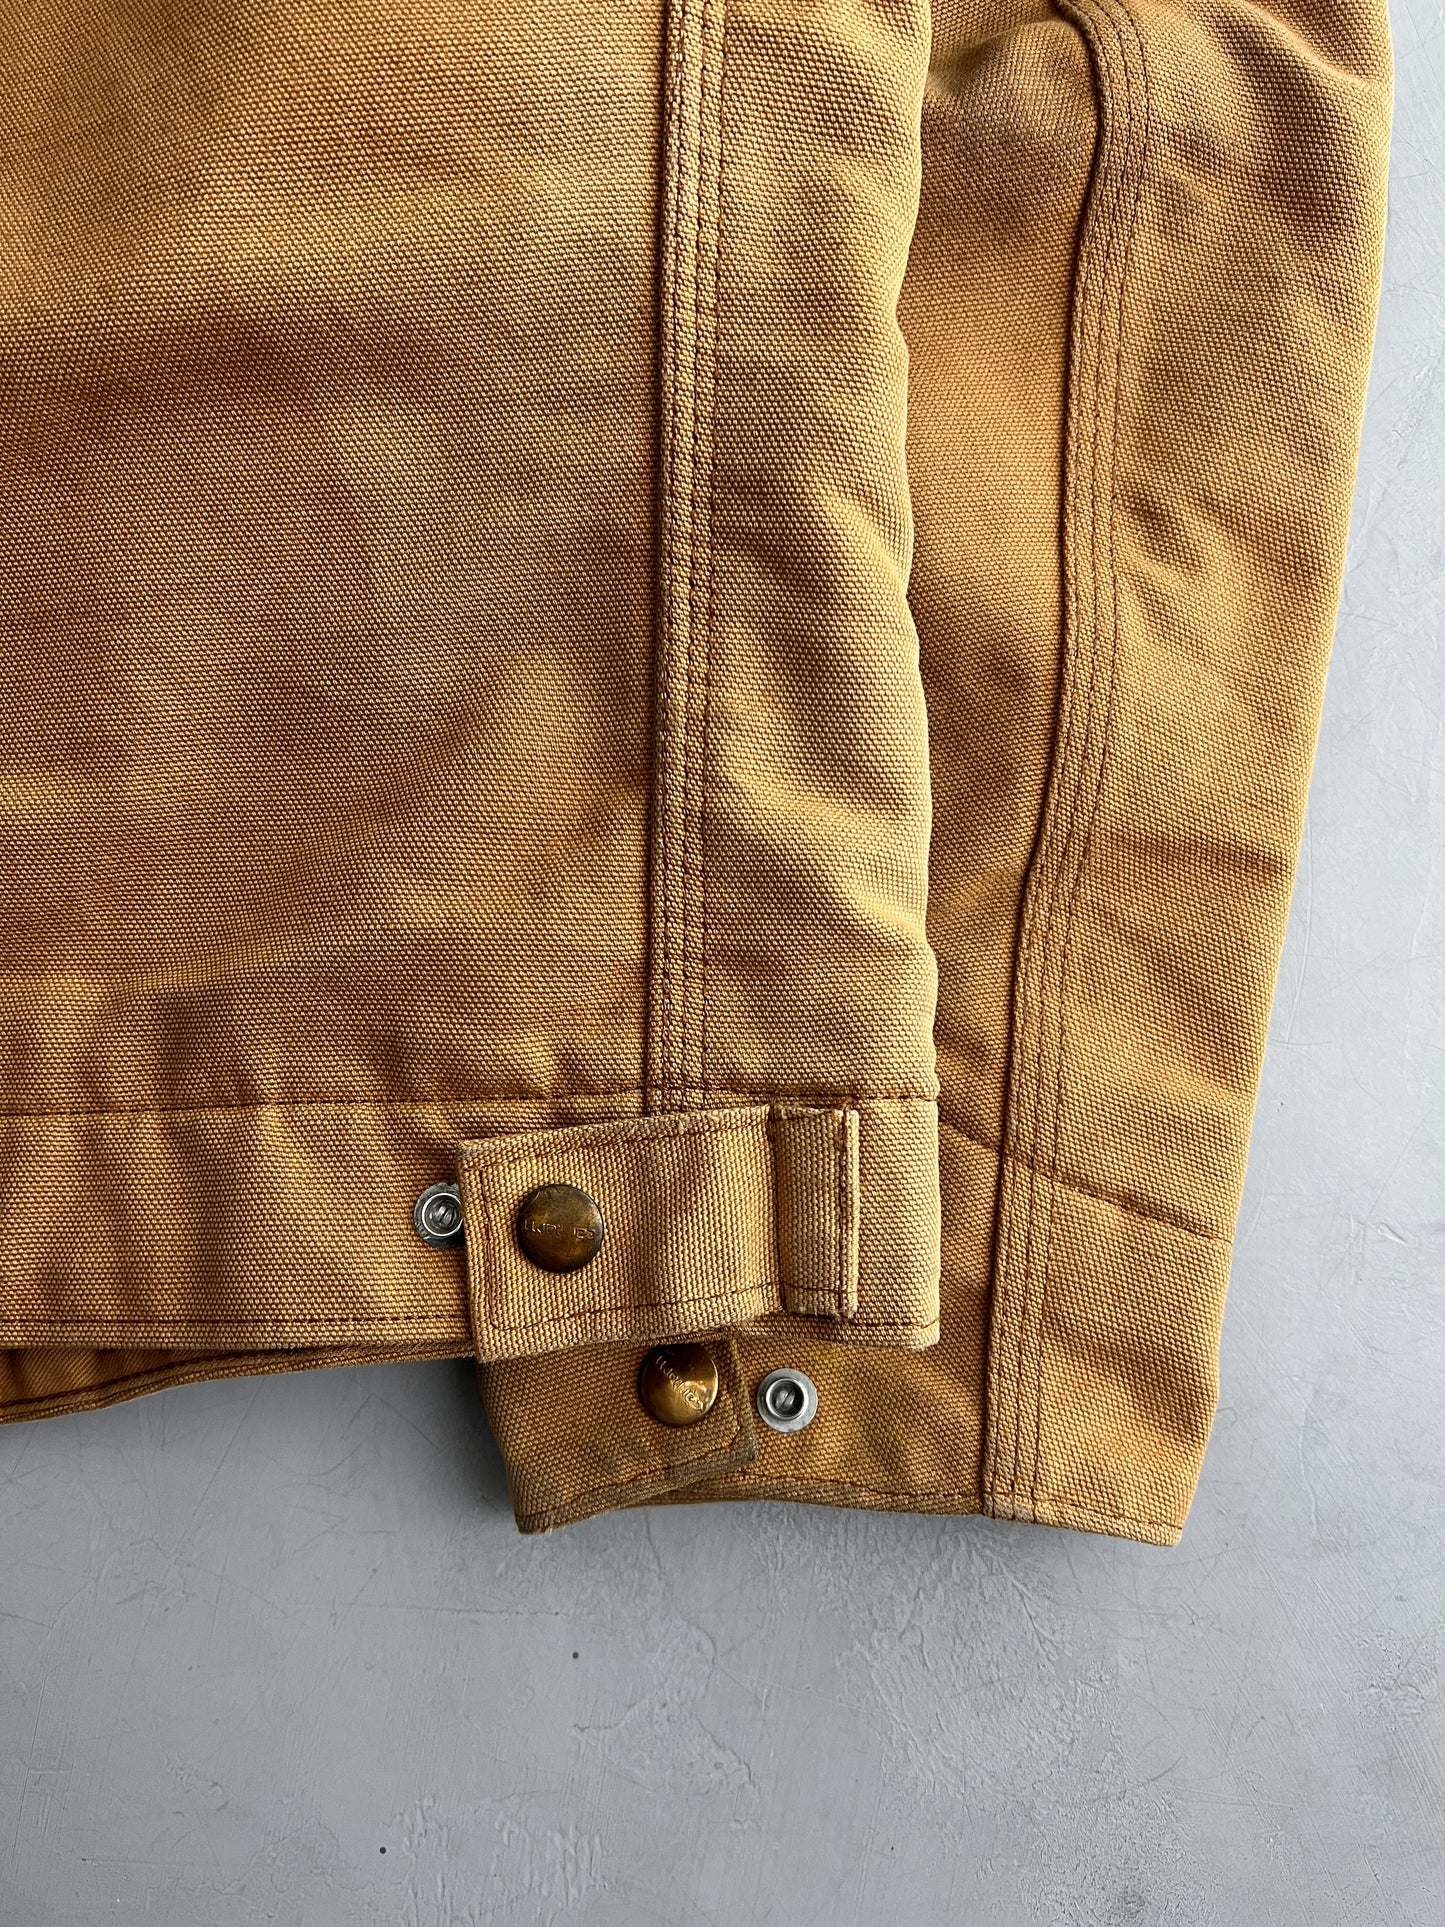 Made in USA Carhartt Detroit Jacket [L]